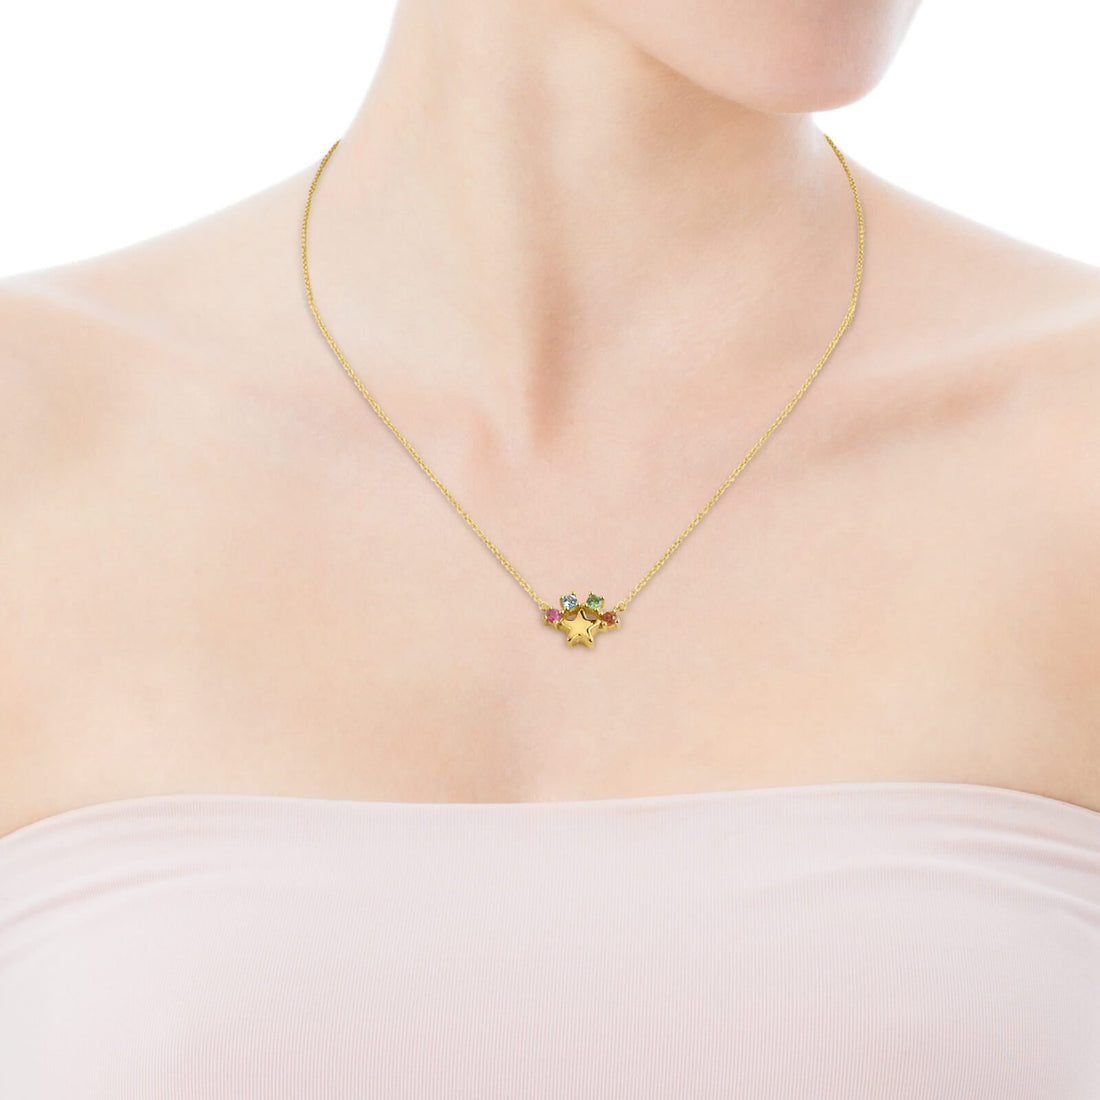 TOUS 18Kt gold Real Sisy Star Necklace